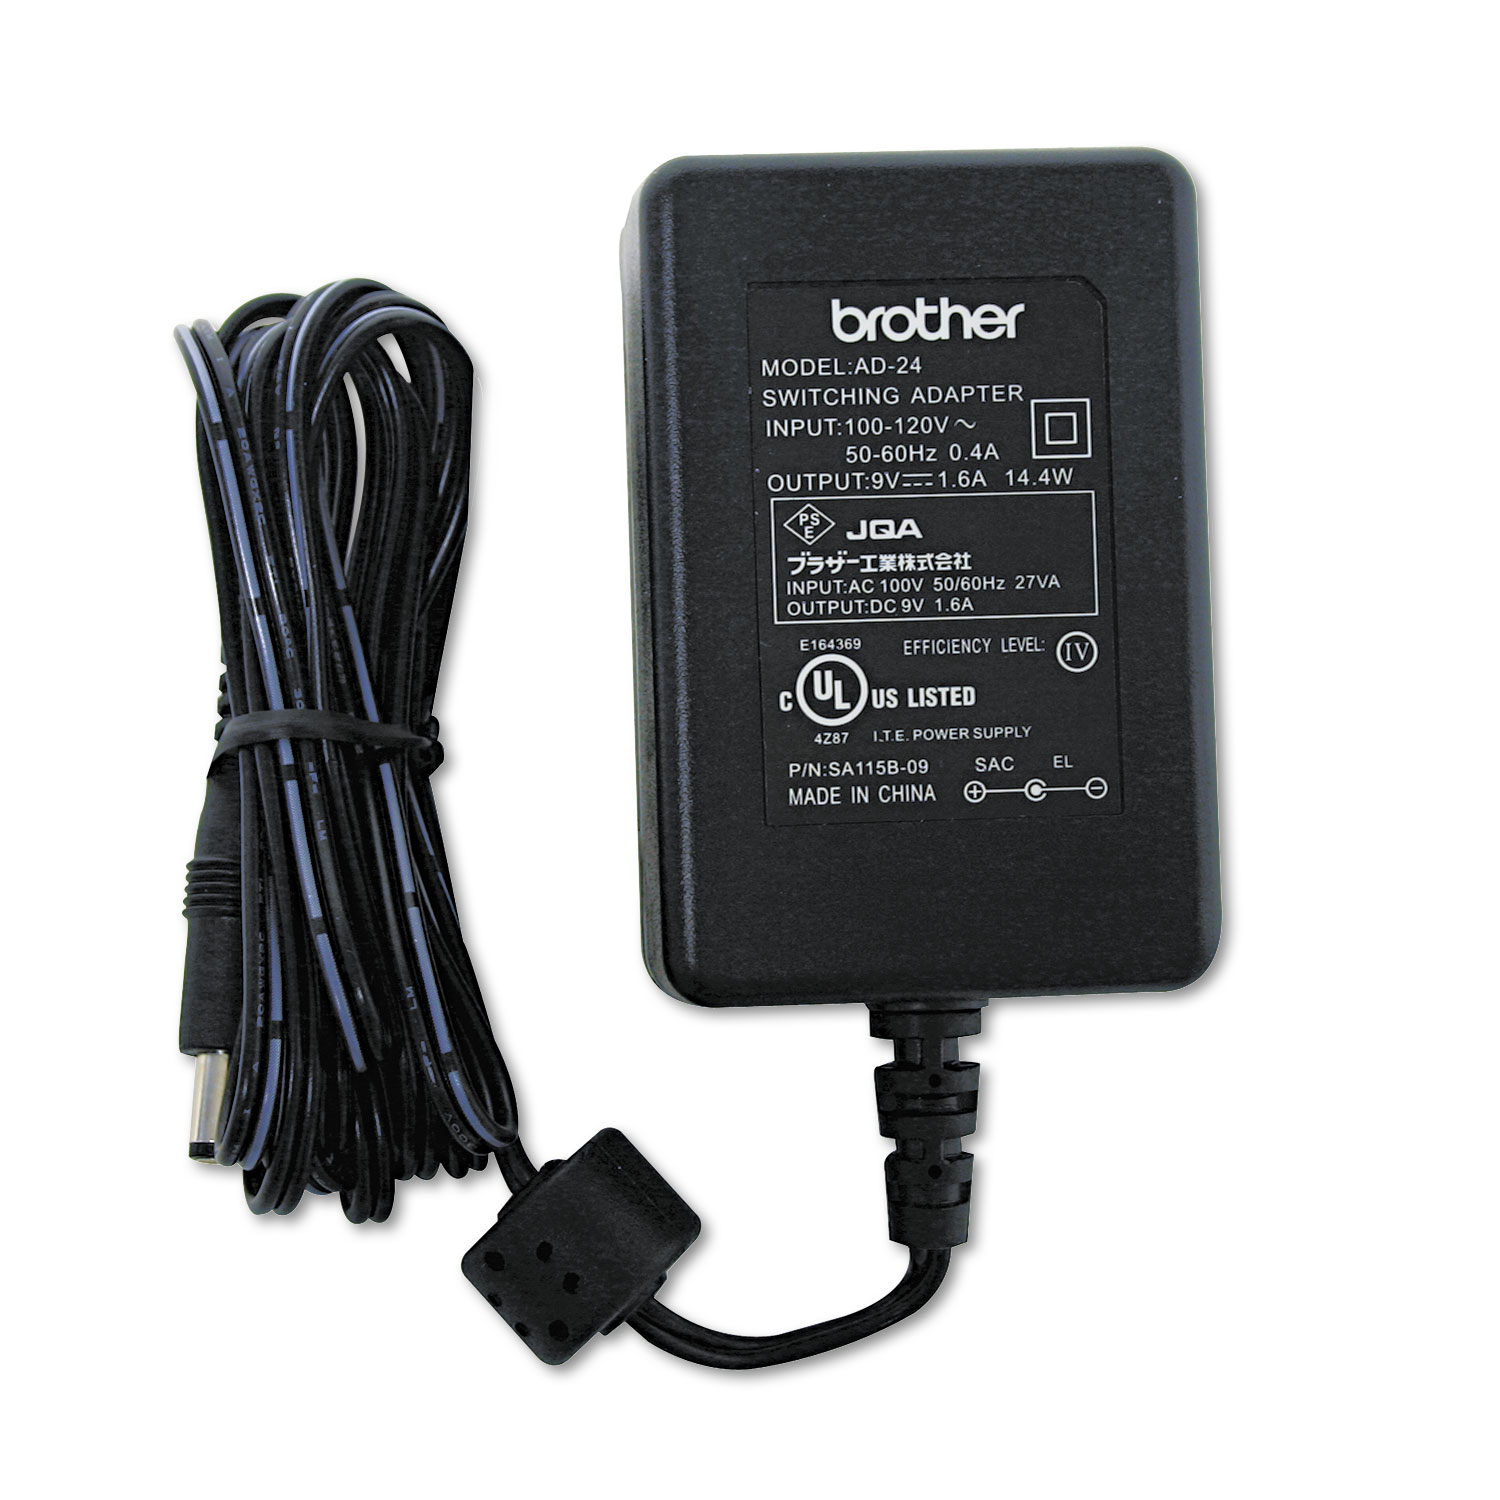  Brother P-Touch AD24 AC Adapter for Brother P-Touch Label Makers (BRTAD24) 